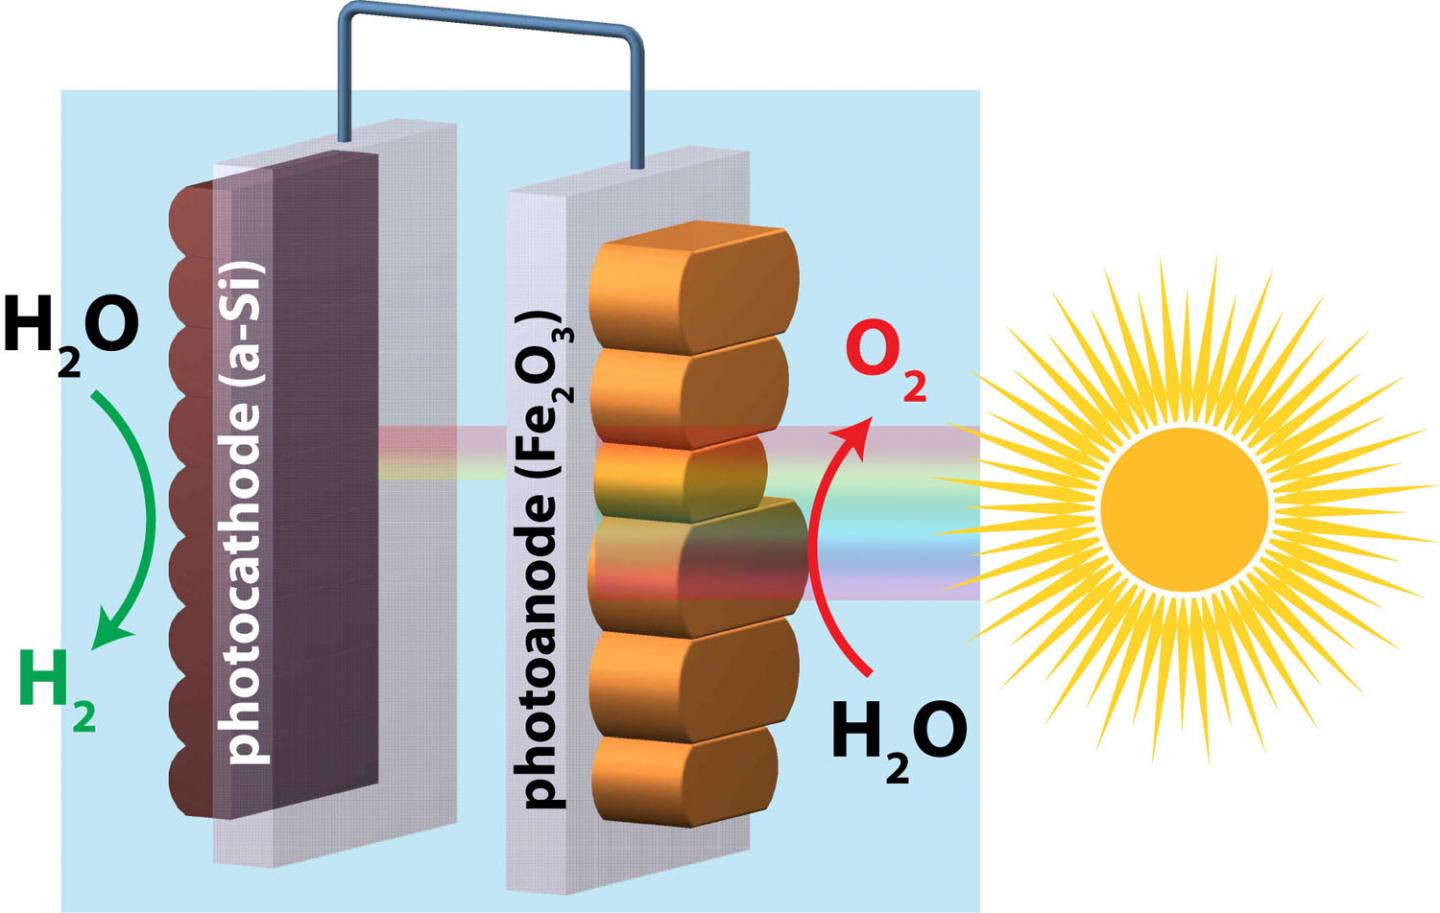 Water splitting combines sunlight and water in a chemical reaction in order to harvest clean hydrogen energy. By smoothing the surface of hematite, a team of researchers led by Boston College chemist Dunwei Wang achieved 'unassisted' water splitting using the abundant rust-like mineral and silicon to capture and store solar energy within hydrogen gas. Credit Courtest of Nature Communications 